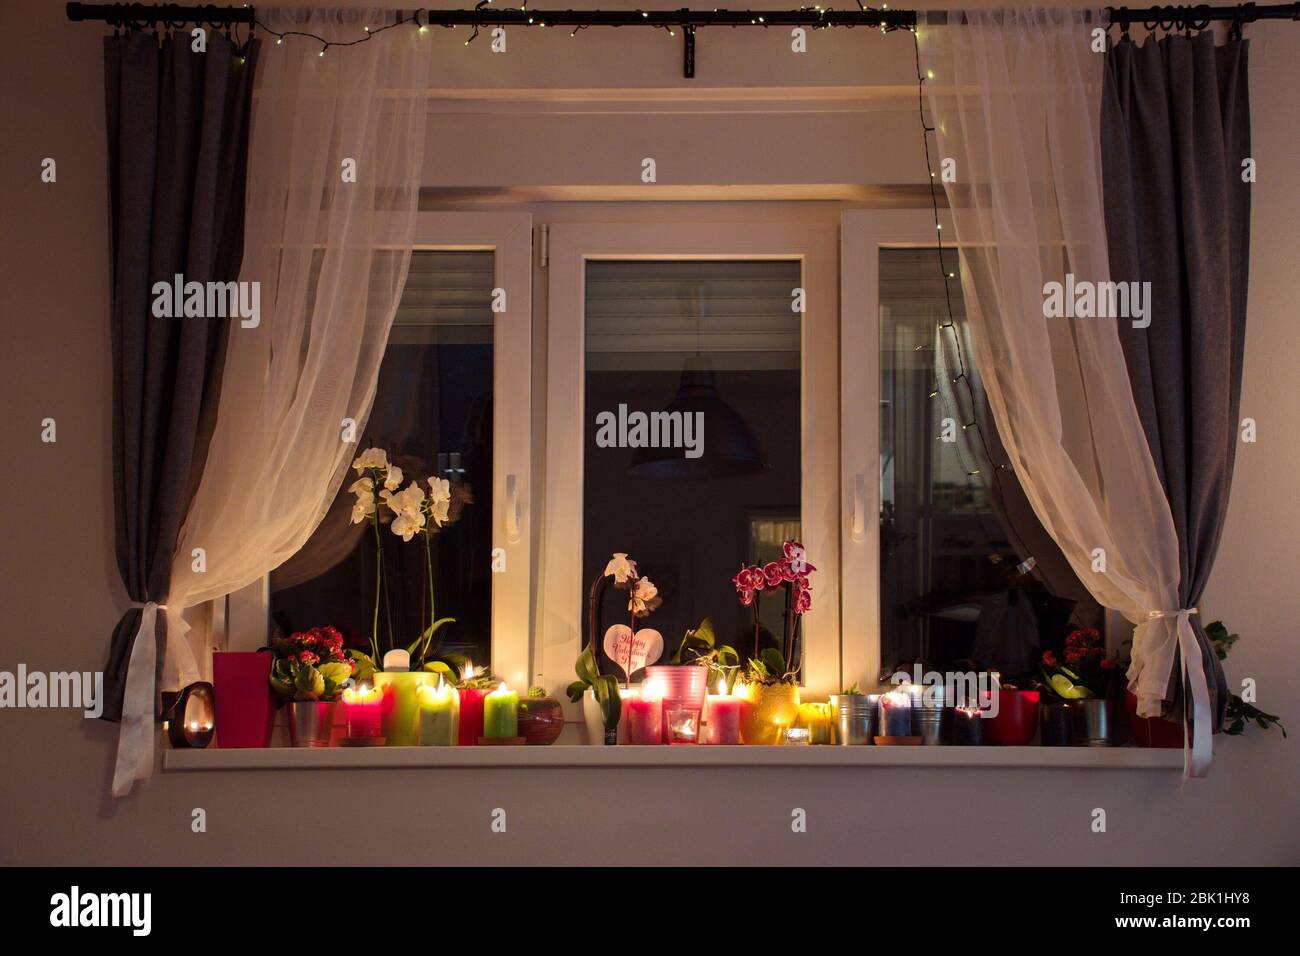 Window decorated with candles and potted plants Stock Photo